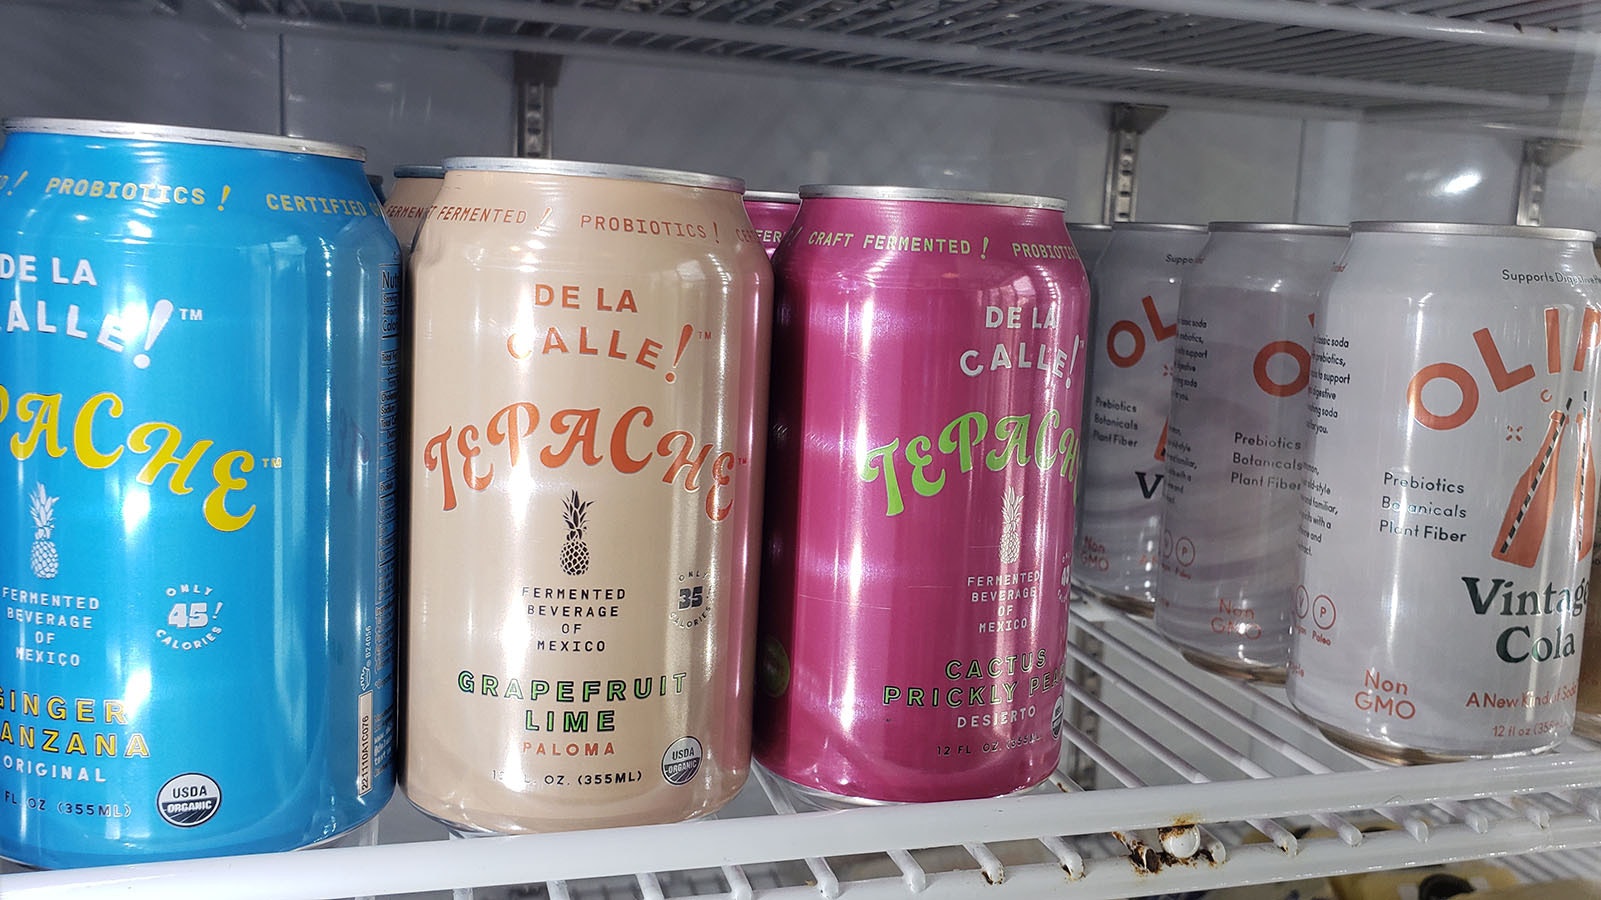 Mexican fermented sodas with just 10 carbs each are among the unique products available at Casper's neighborhood grocery.